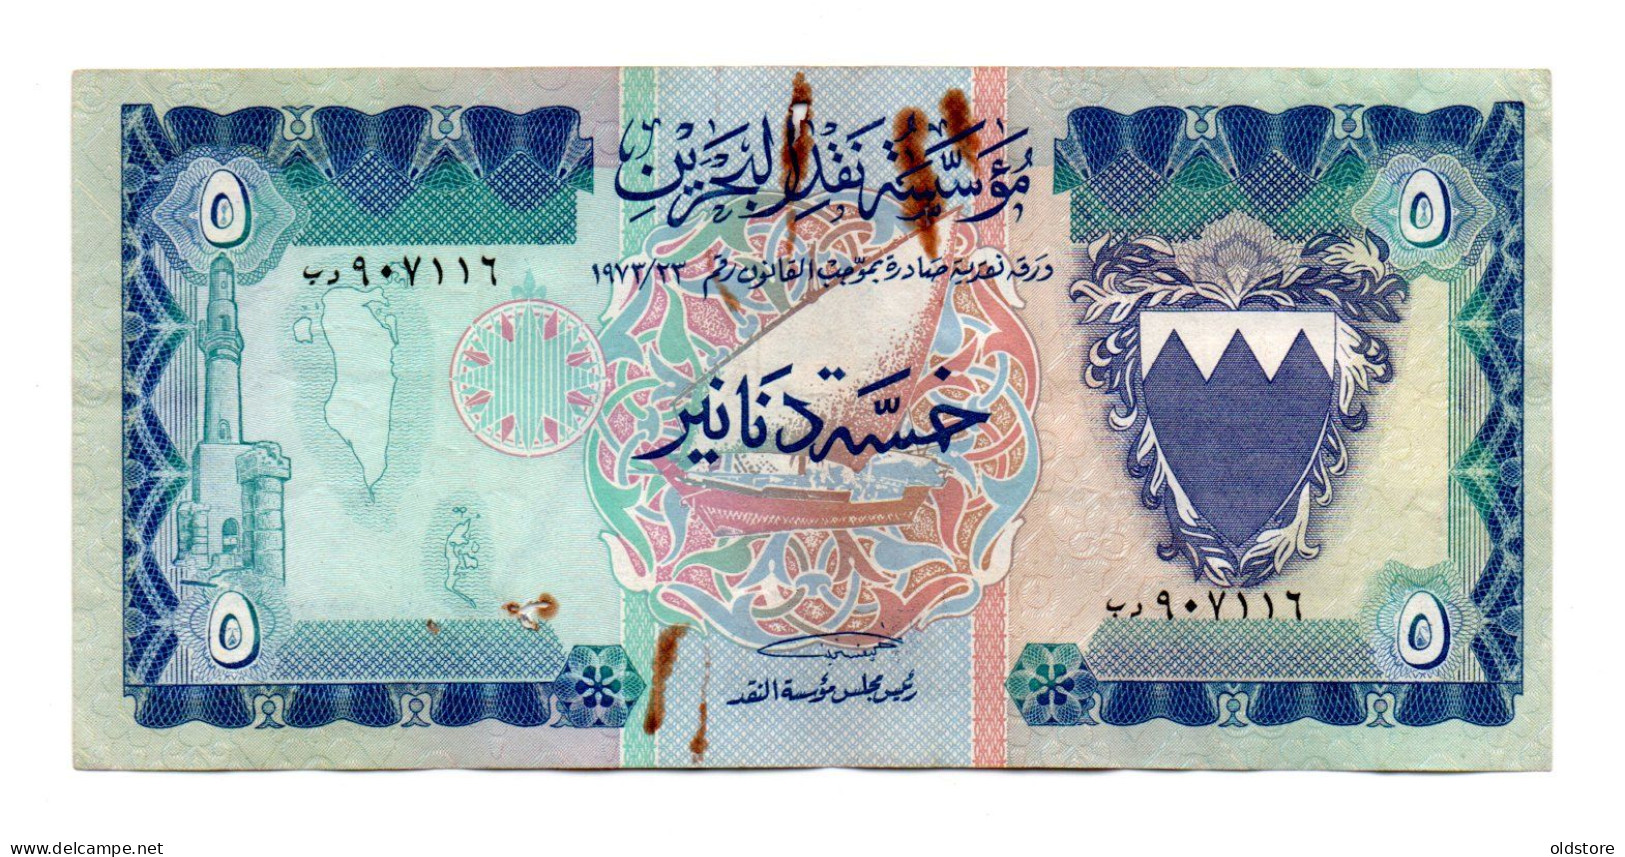 Bahrain Banknotes - 5 Dinars - Second Edition - ND 1973 - Used Condition - Bahrein